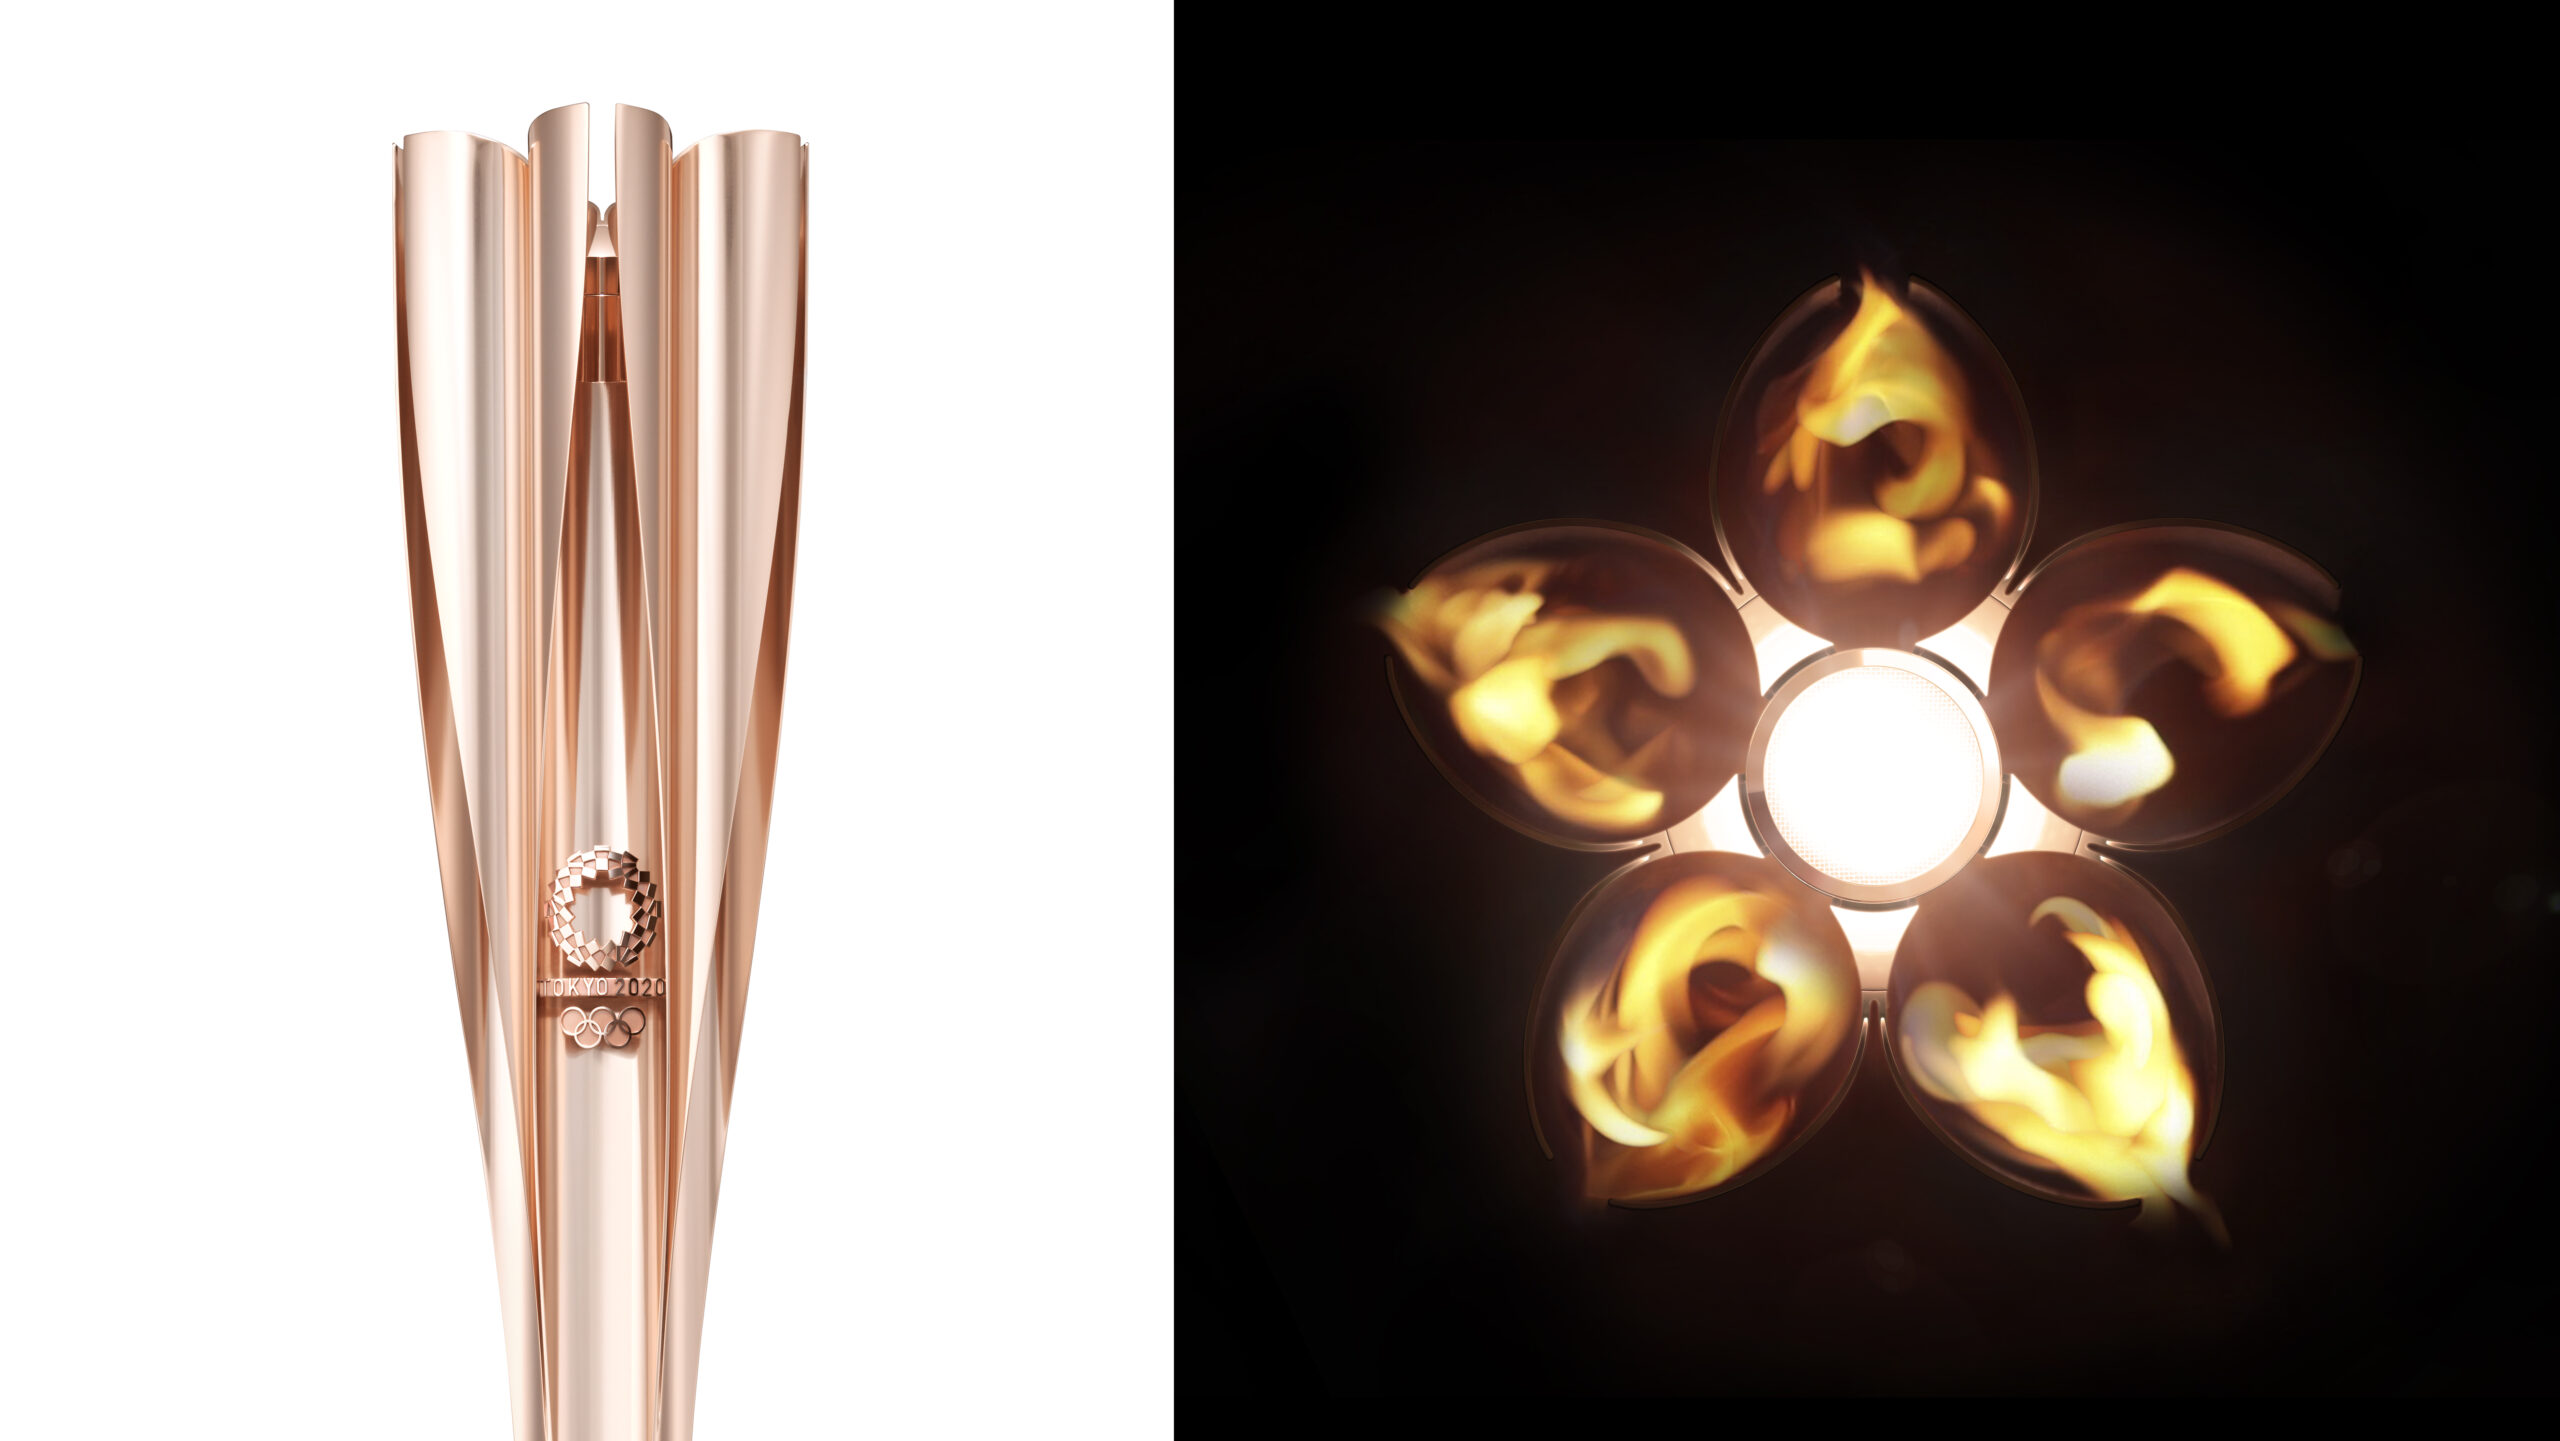 On the left, a side view of the Tokyo 2020 Olympic torch shows the official logo and the rose-gold color of the flower-shaped torch. On the right, a top view of the torch while lit displays the five petals and central flame of the cherry blossom.